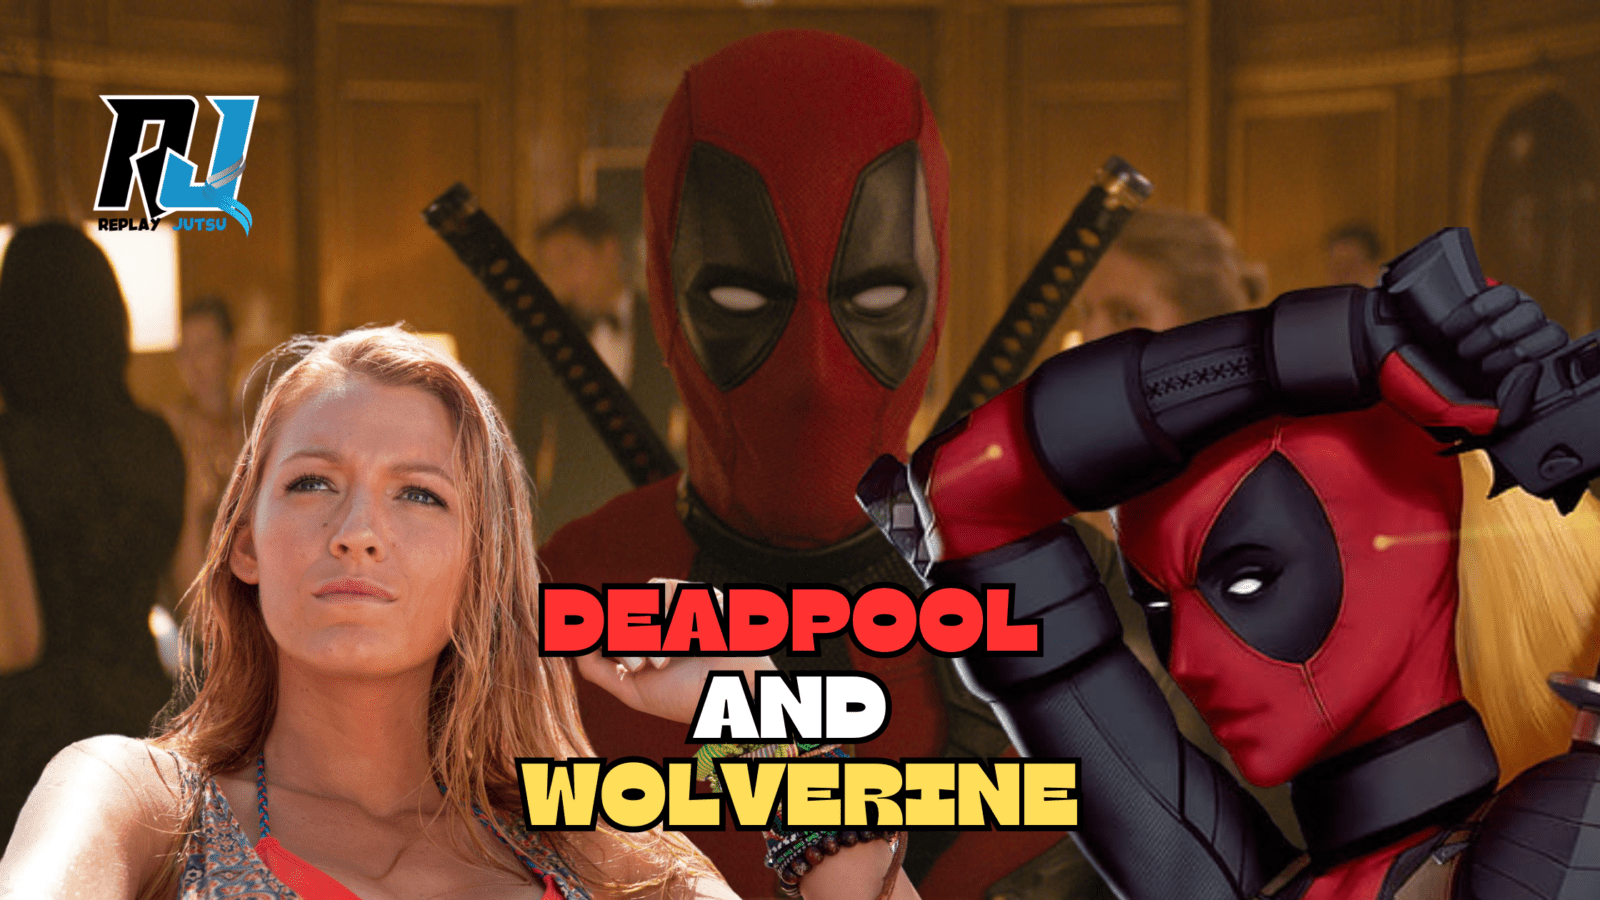 Is Blake Lively Playing Lady Deadpool in 'Deadpool Vs Wolverine'?